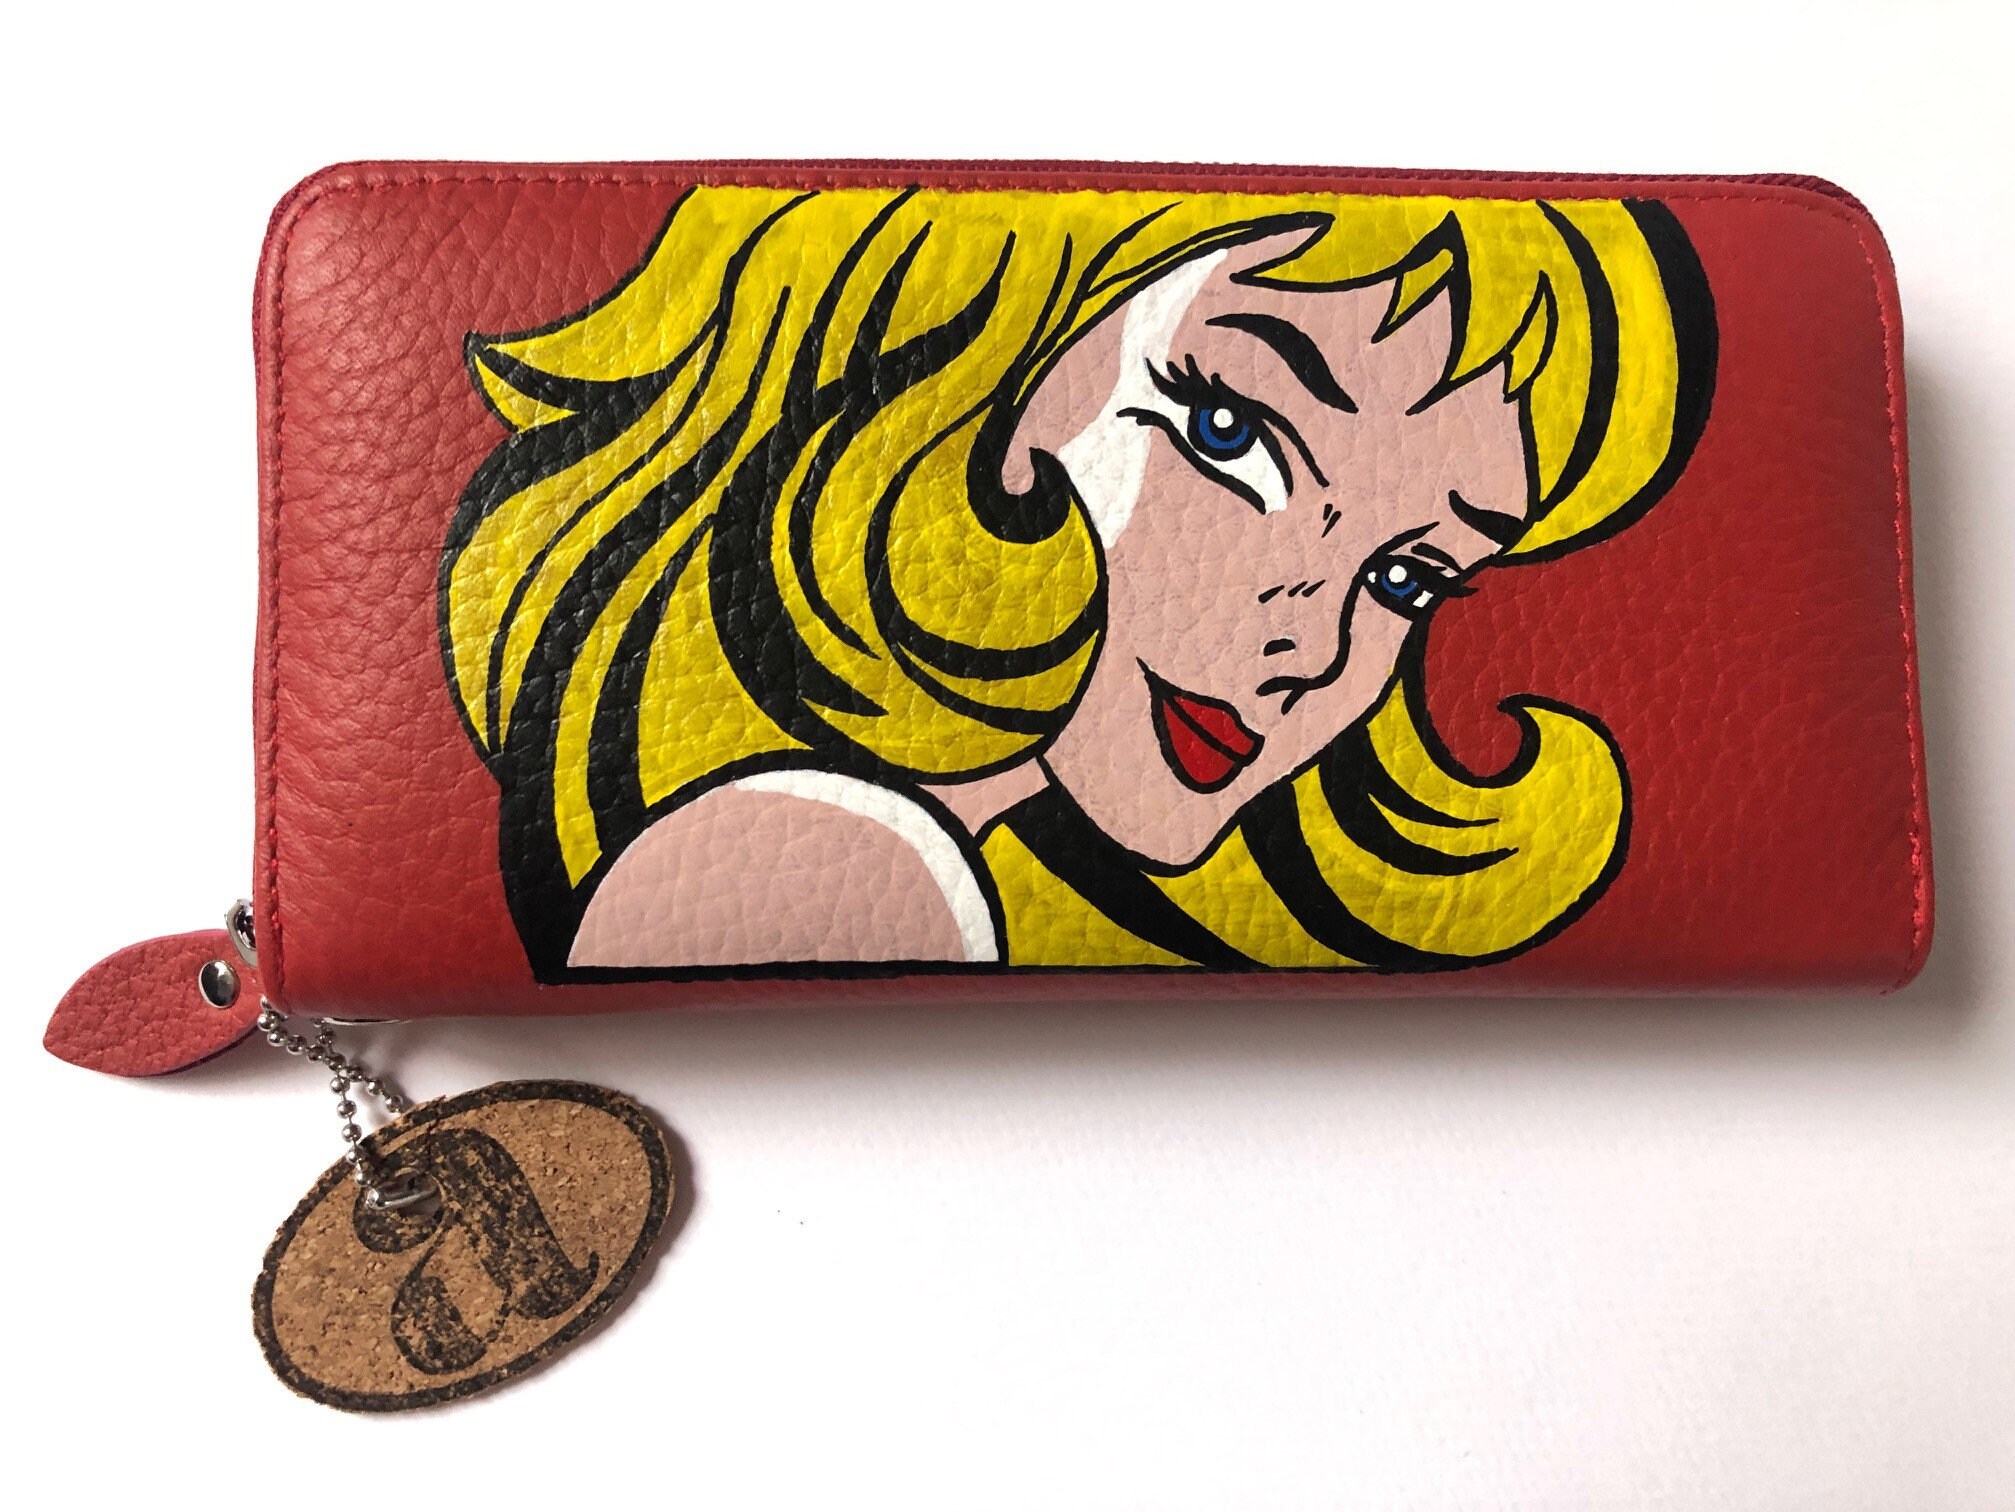 Custom Wallet, Hand Painted Wallet, Hand Painted Clutch, Pop Art Bag, Red Wallet, Perfect Gift for Her, Unique Wallet, Women's Day Gift